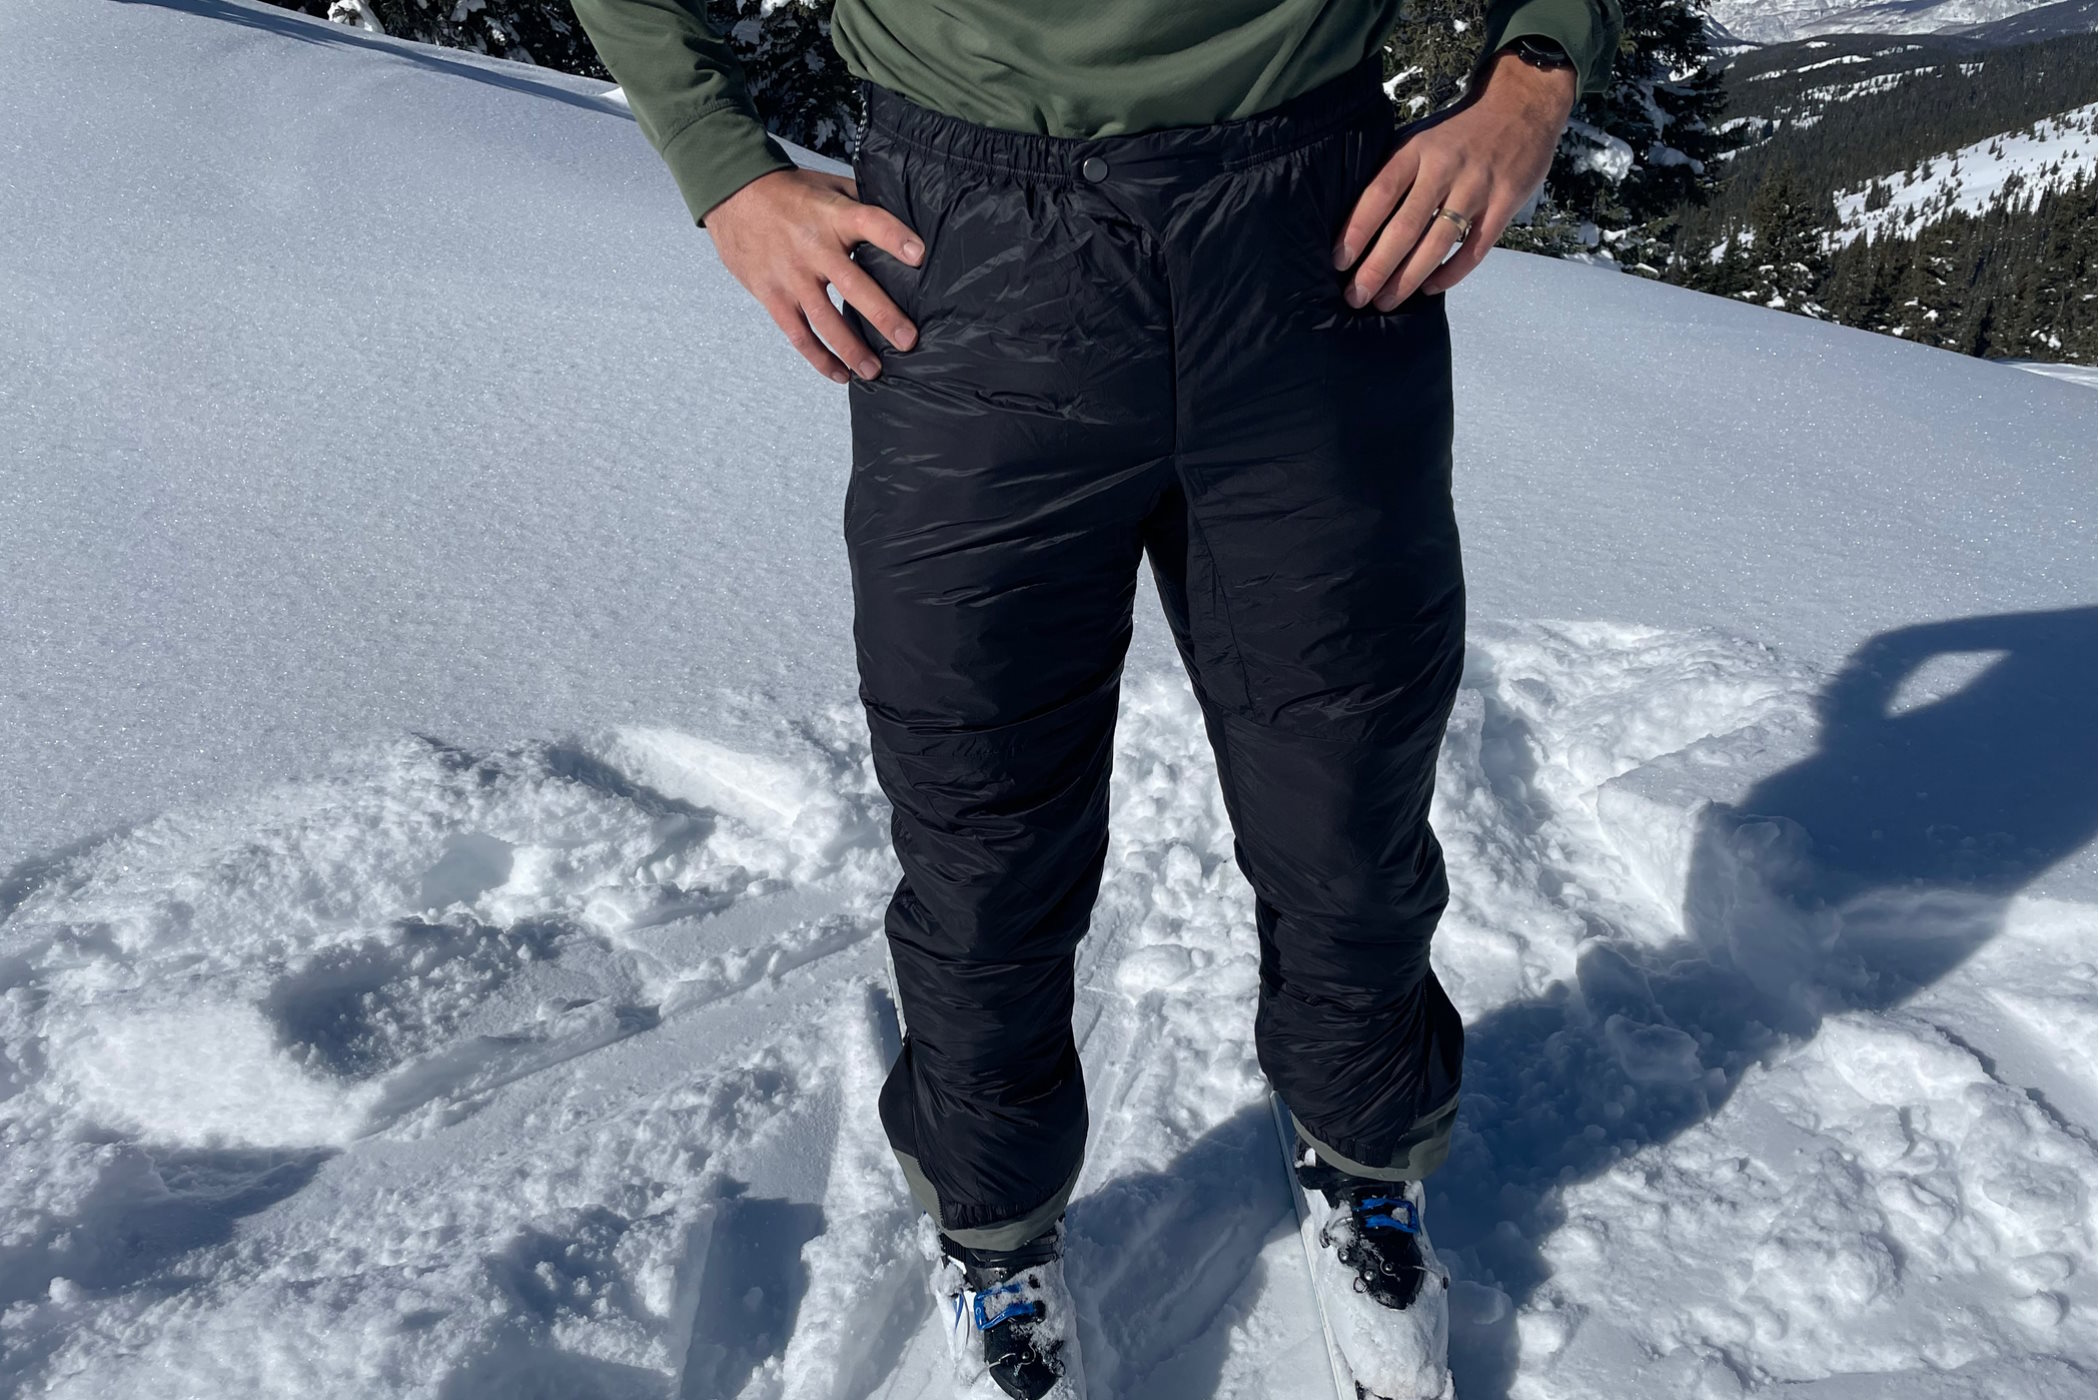 Patagonia DAS Light Pants Review: The Missing Link in Ultralight